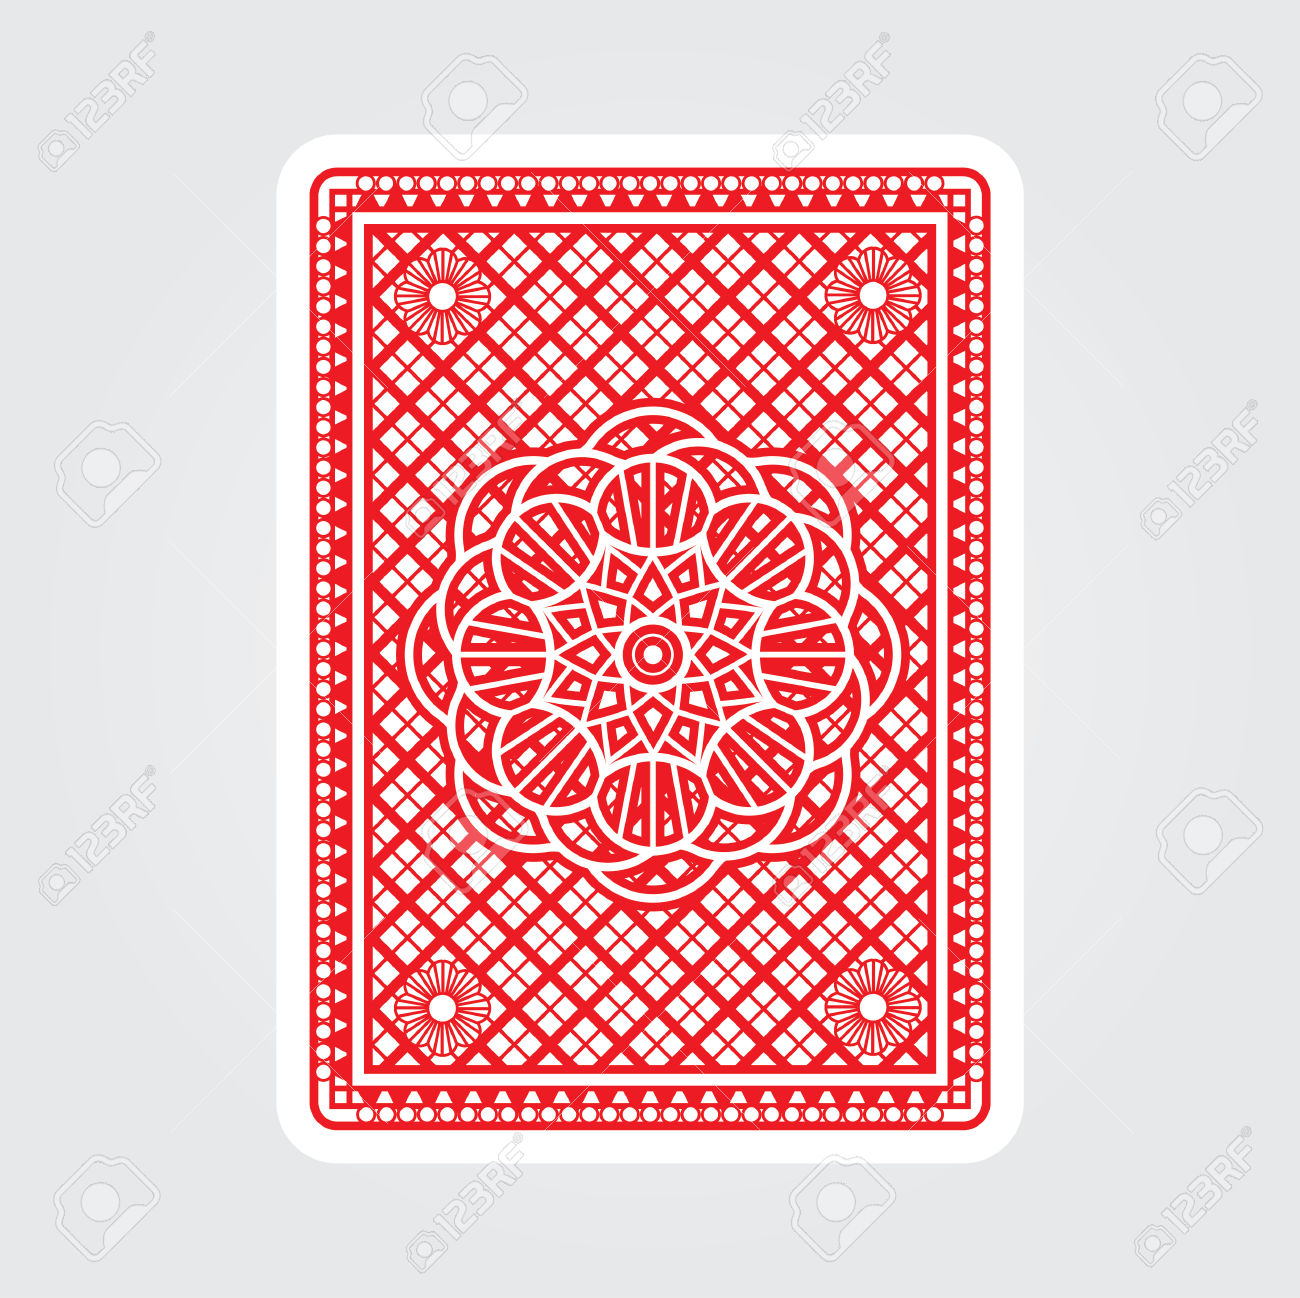 Playing Card Back Clipart Cute.